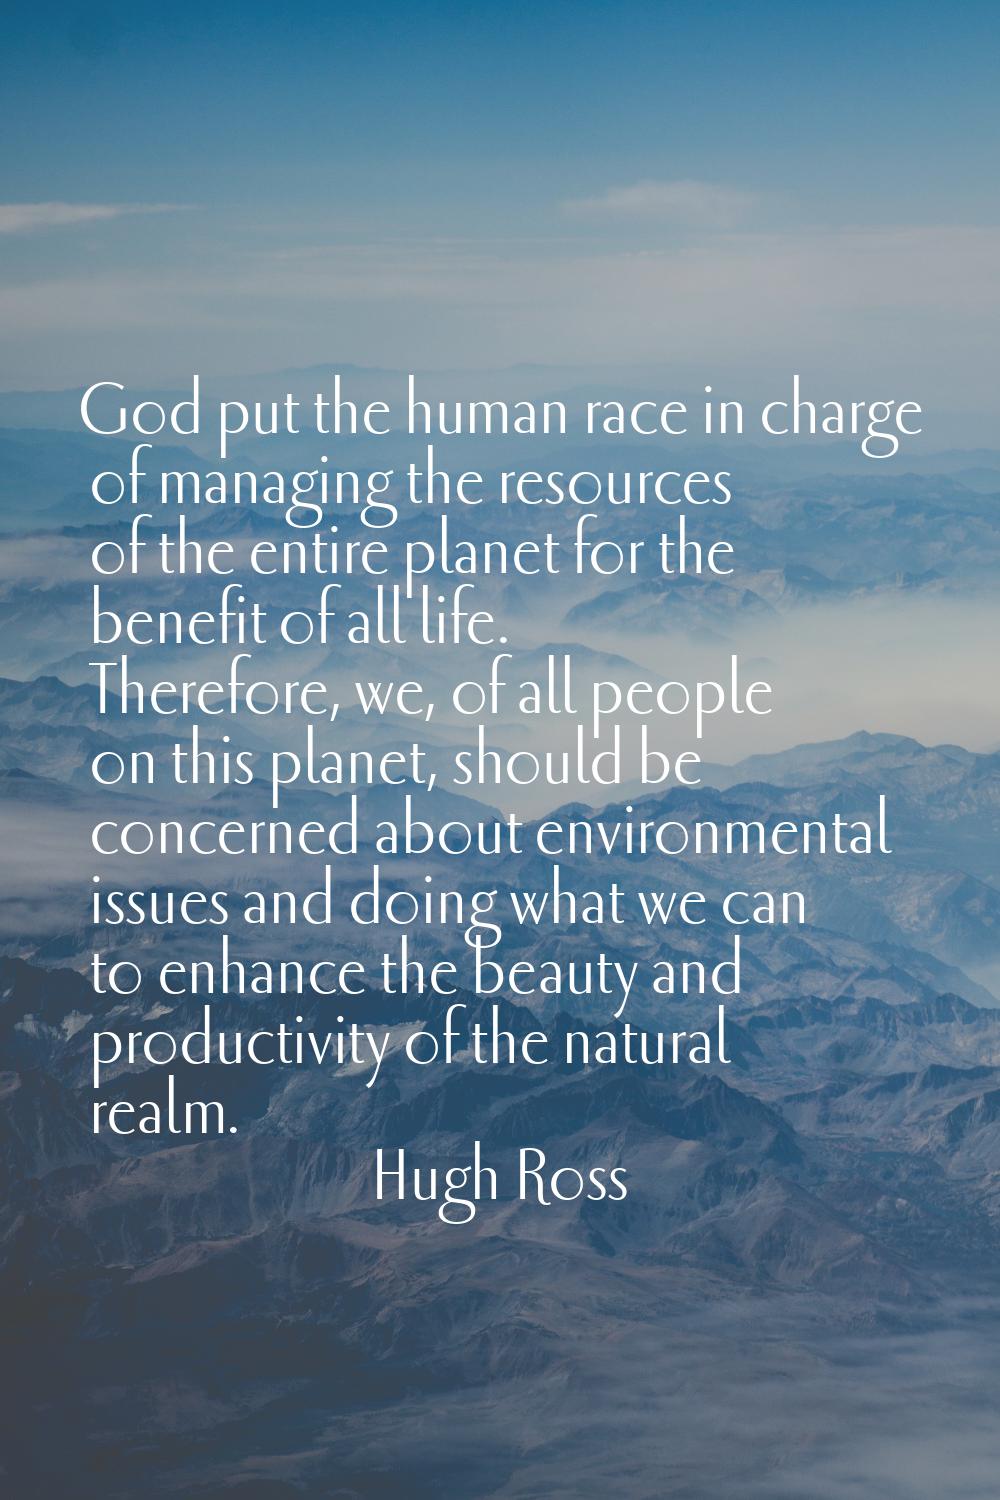 God put the human race in charge of managing the resources of the entire planet for the benefit of 